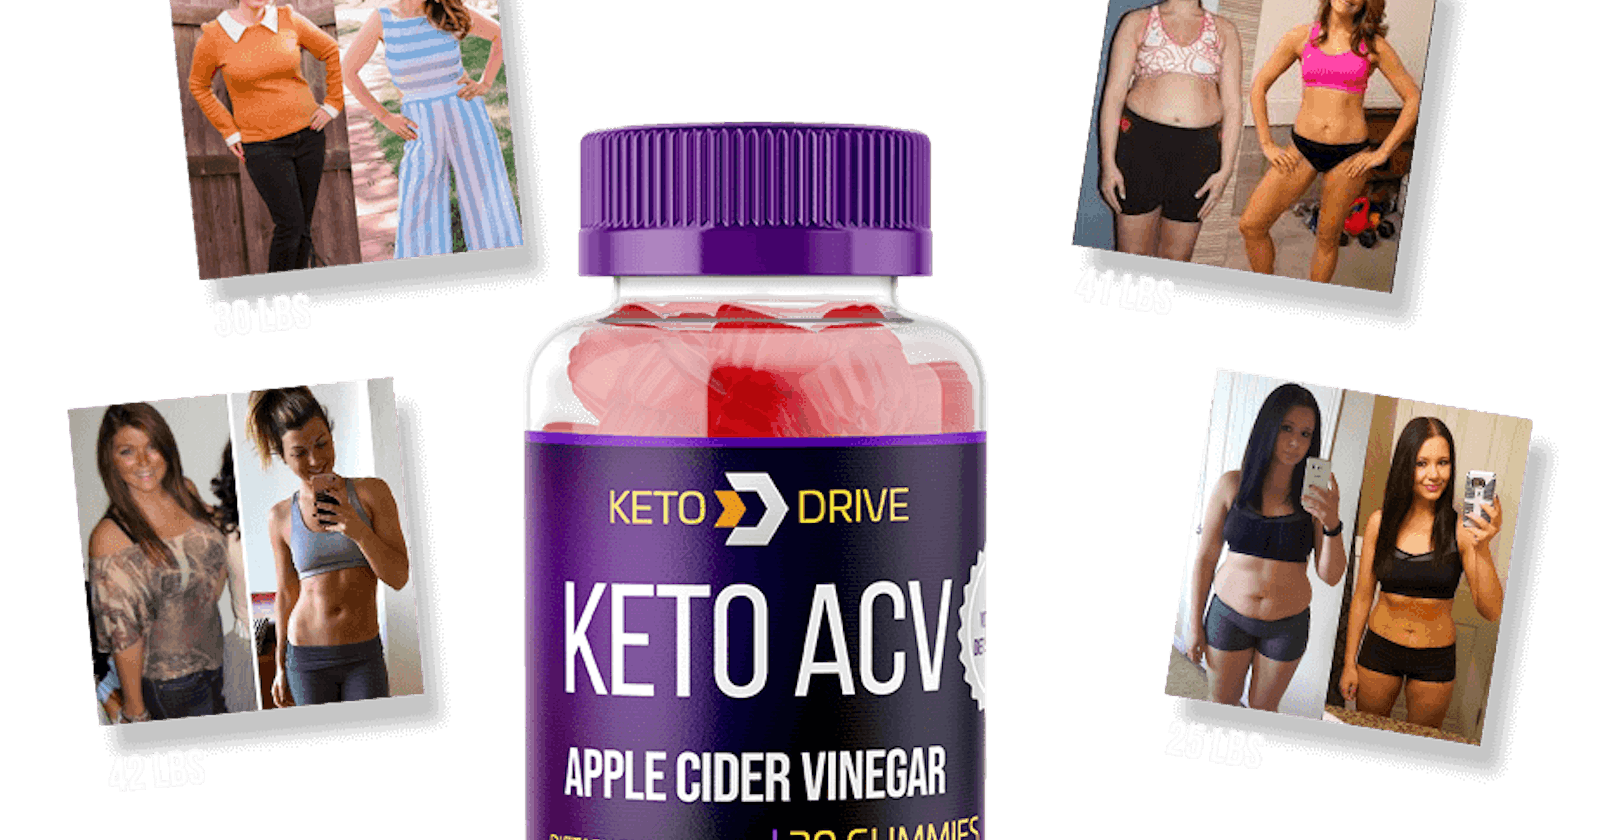 Kickstart Your Weight Loss: Discover the Magic of Keto Drive in the US, CA!